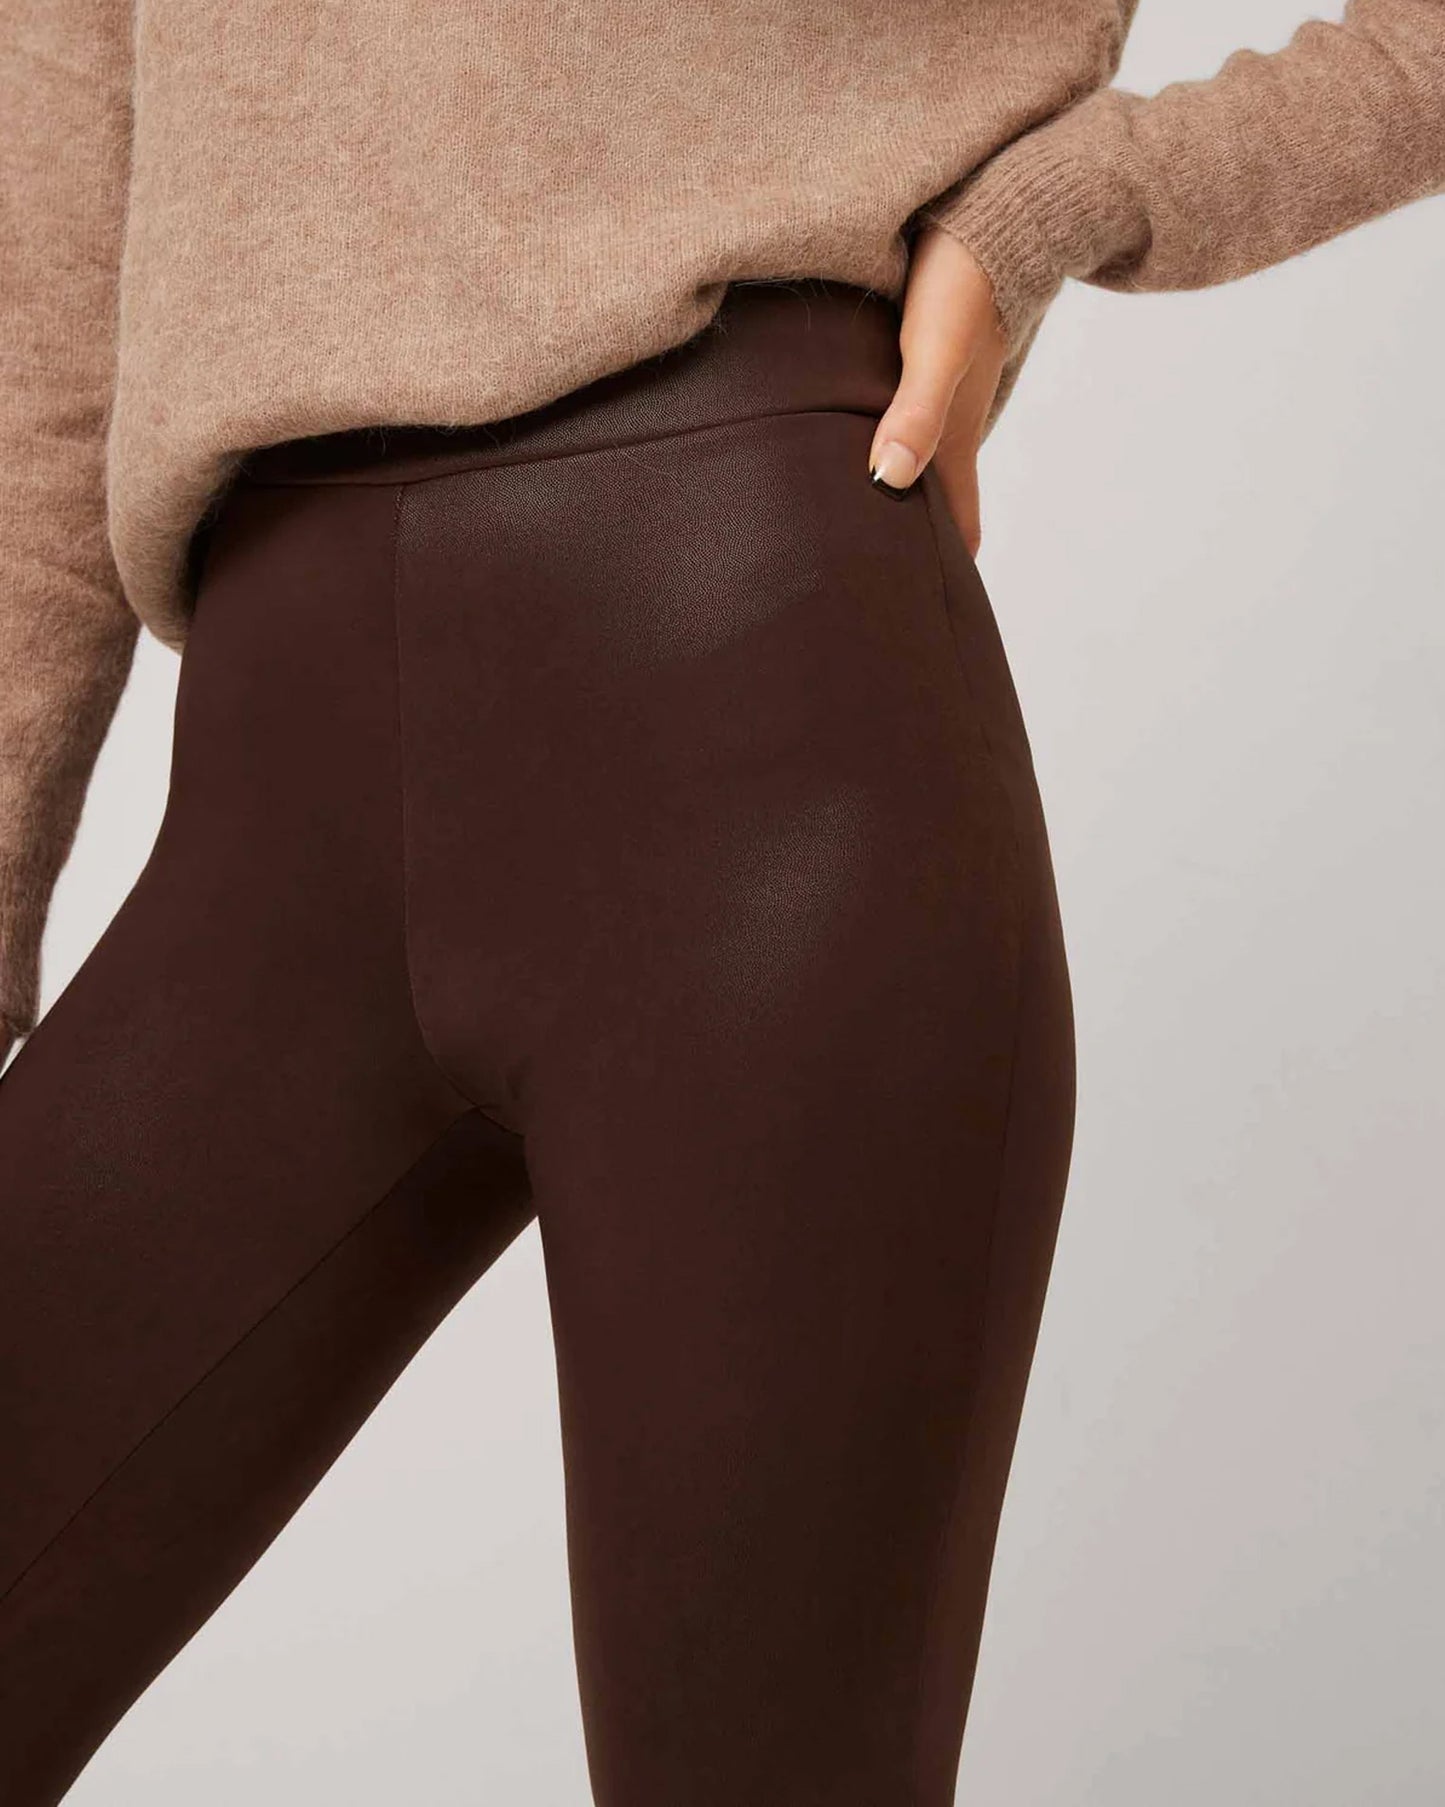 Brown high waisted trouser leggings with faux leather look, worn with beige/camel top..